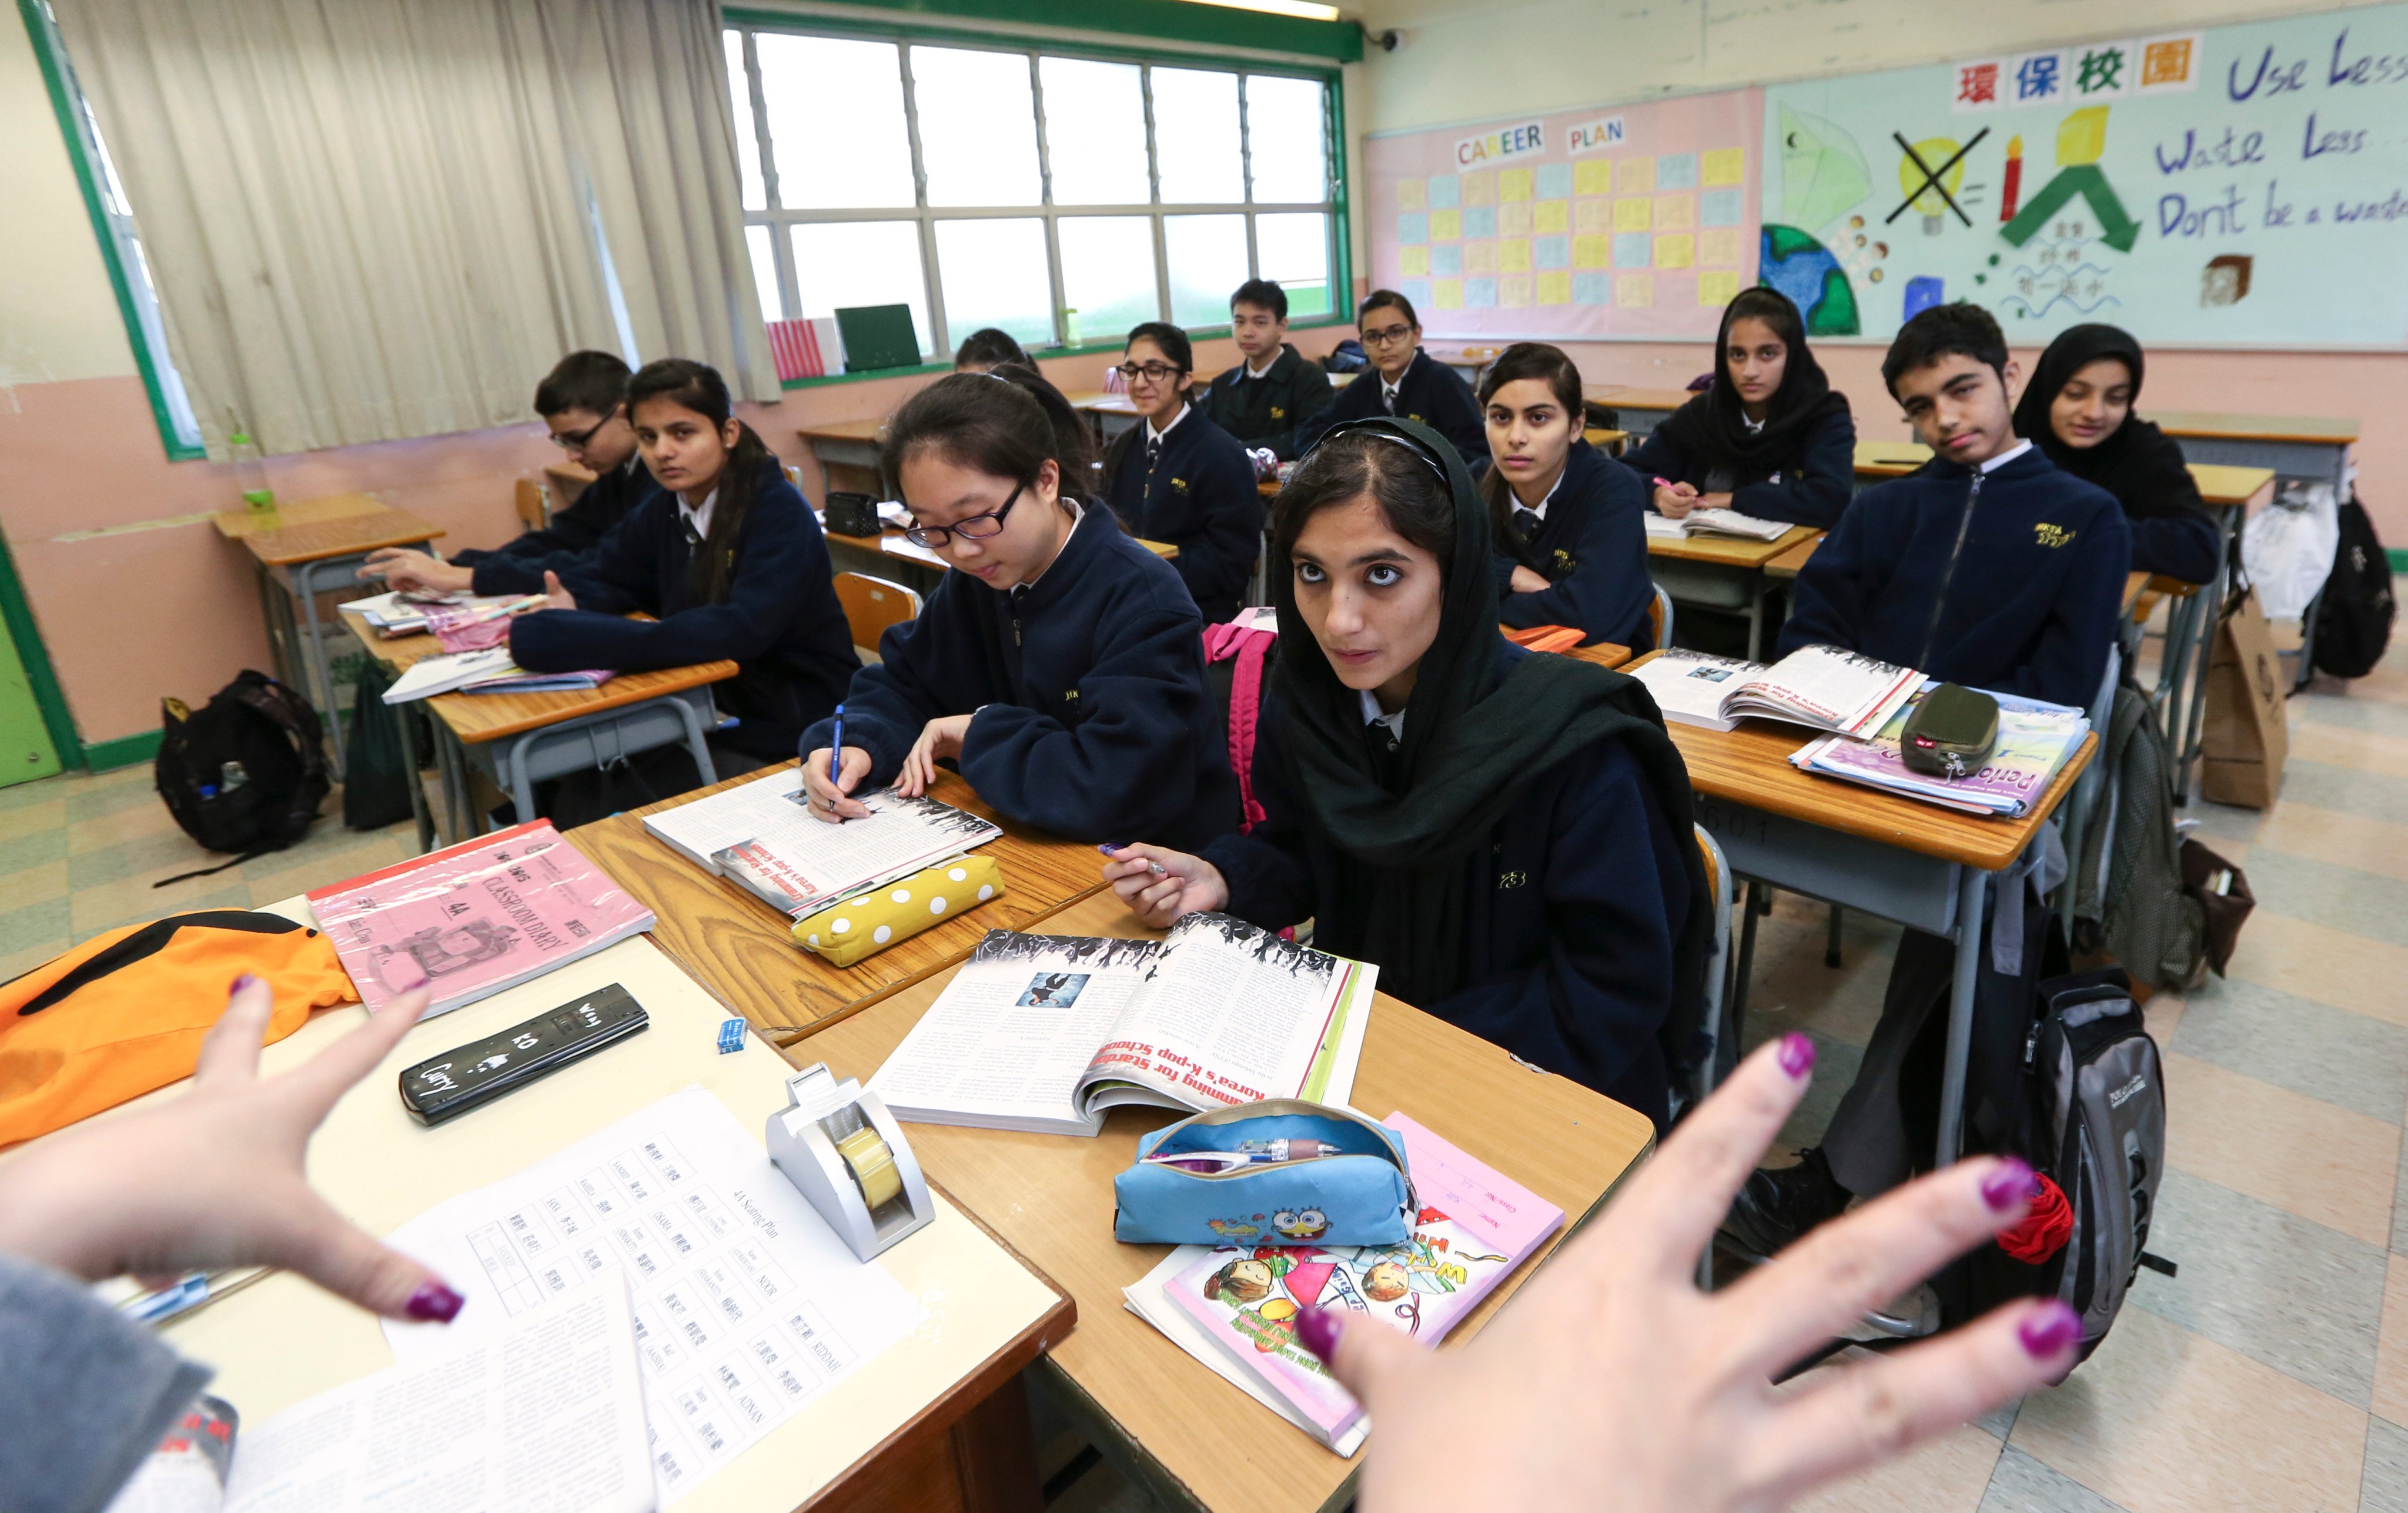 Non-Chinese speaking students at a secondary school in Tseung Kwan O in 2015. The lack of progress in boosting the Chinese language proficiency of Hong Kong’s ethnic minority students has long been discussed. Photo: SCMP